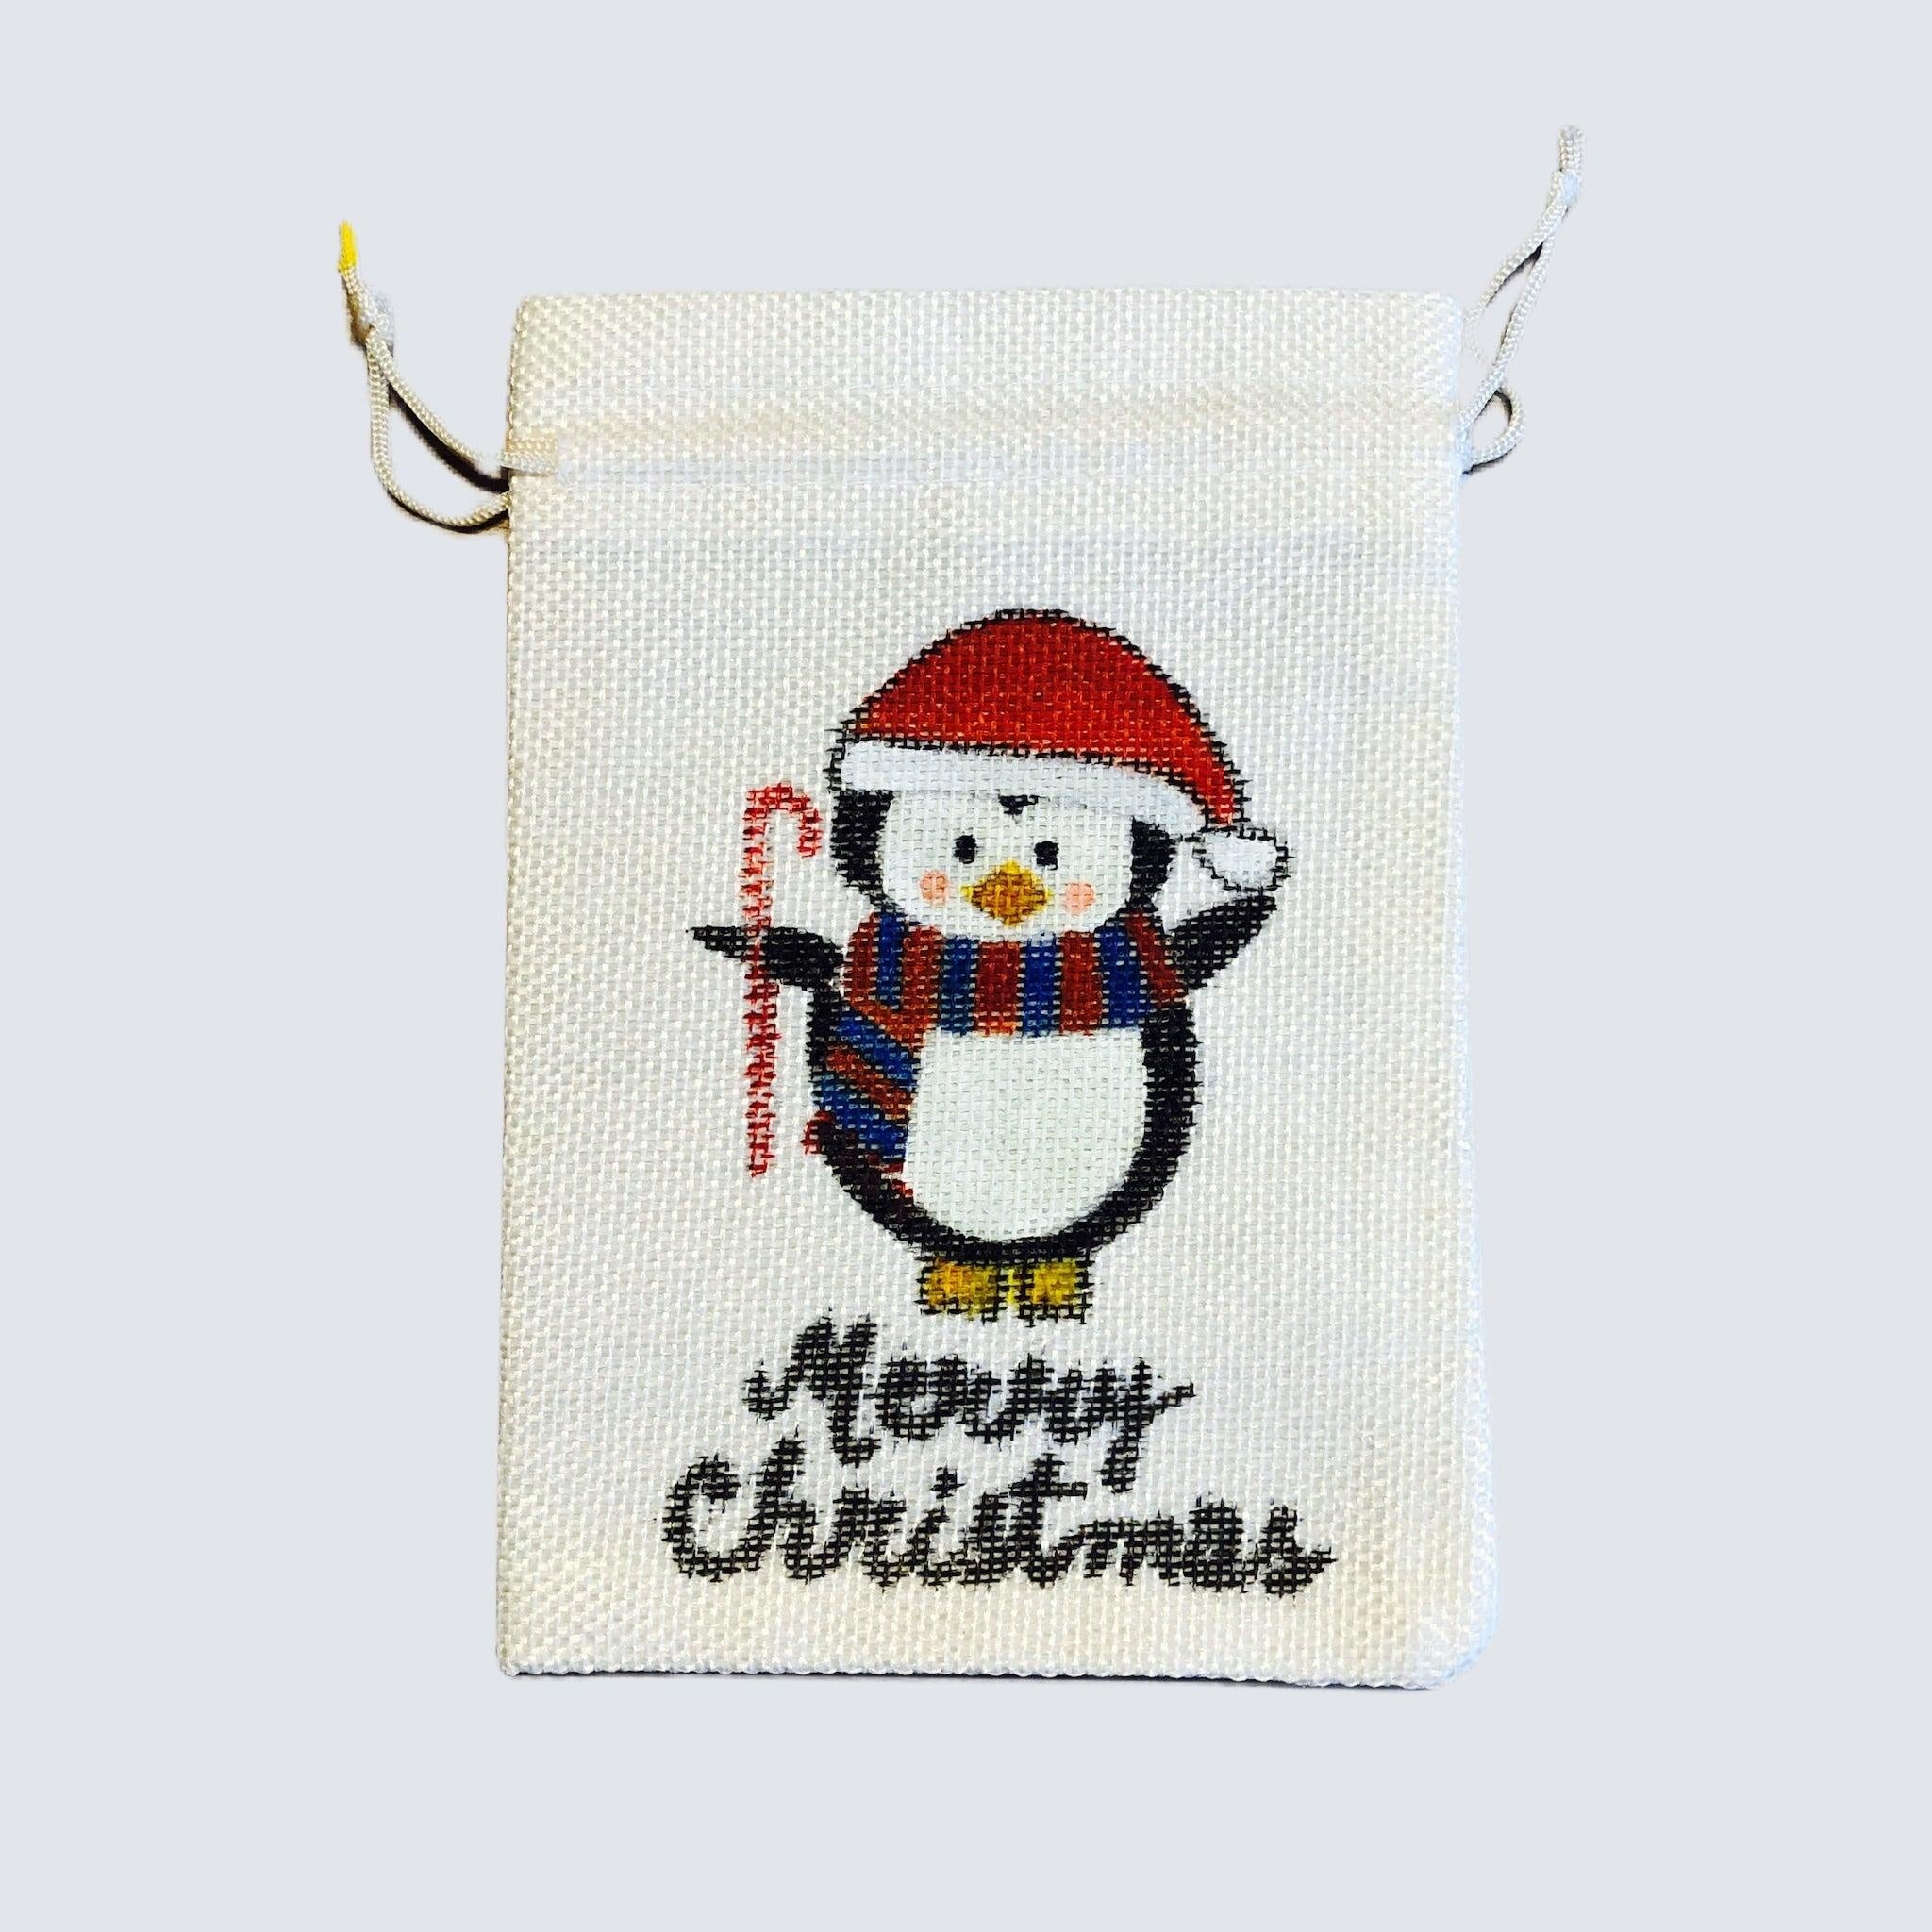 Hand-painted Christmas Gift Pouch - Medium 13x18 cm Cotton Linen Bag with Drawstring